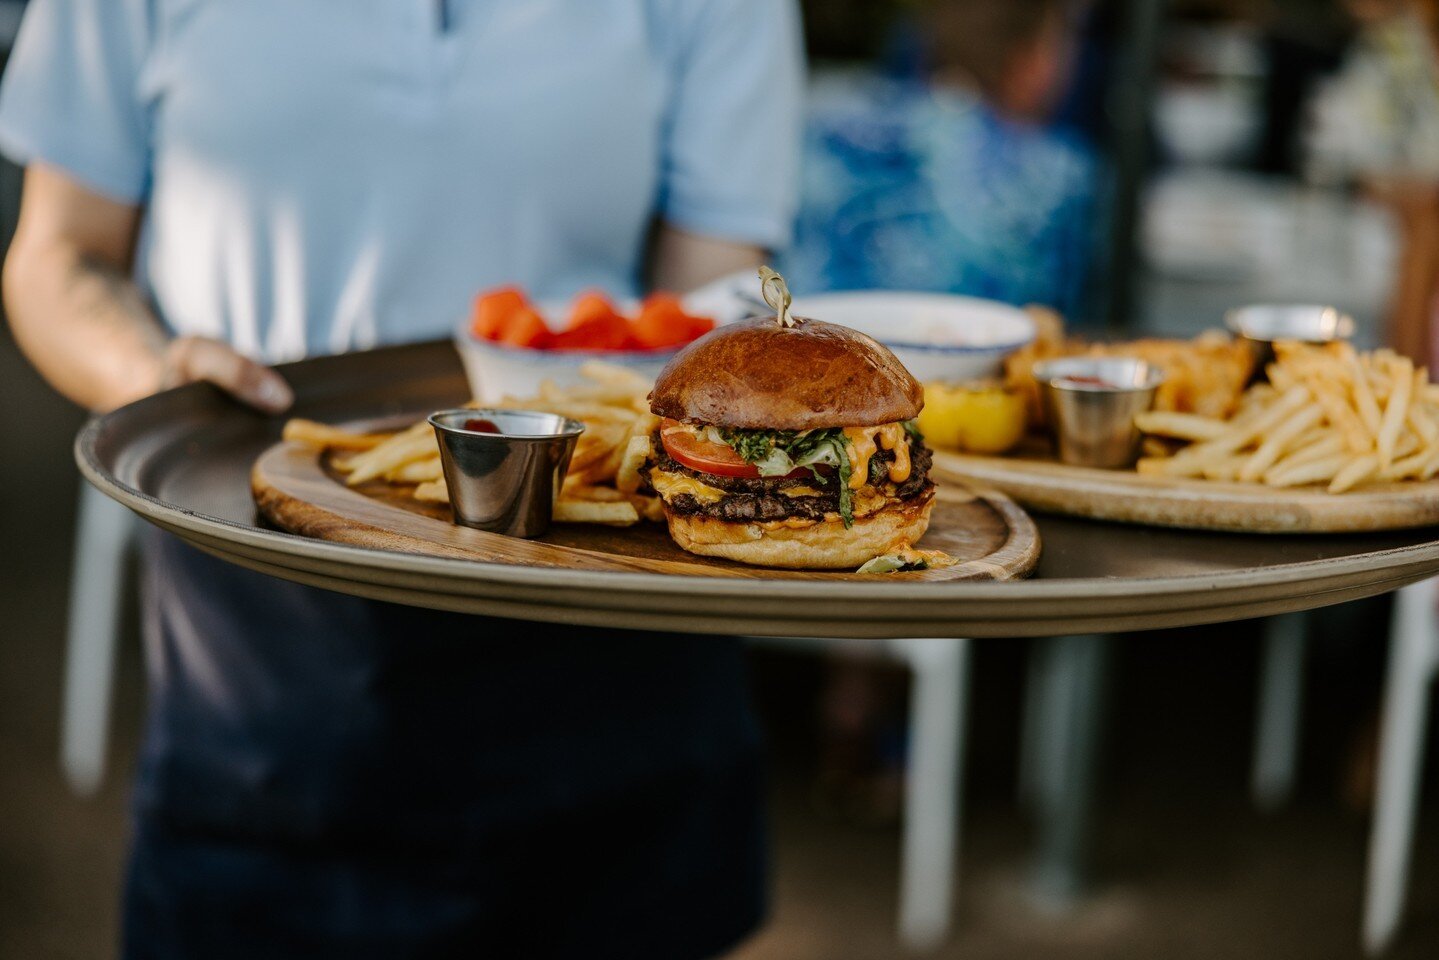 *immediately smiles as your server makes way to your table ⁠
🍔⁠
.⁠
.⁠
.⁠
.⁠
.⁠
#lindeyslakehouse #flatseastbank #instafood #restaurant #delicious #foodporn #lunch #dinner #yummy #foodphotography #drinks #eatlocal #happyhour #tasty #fall #foodpics #f